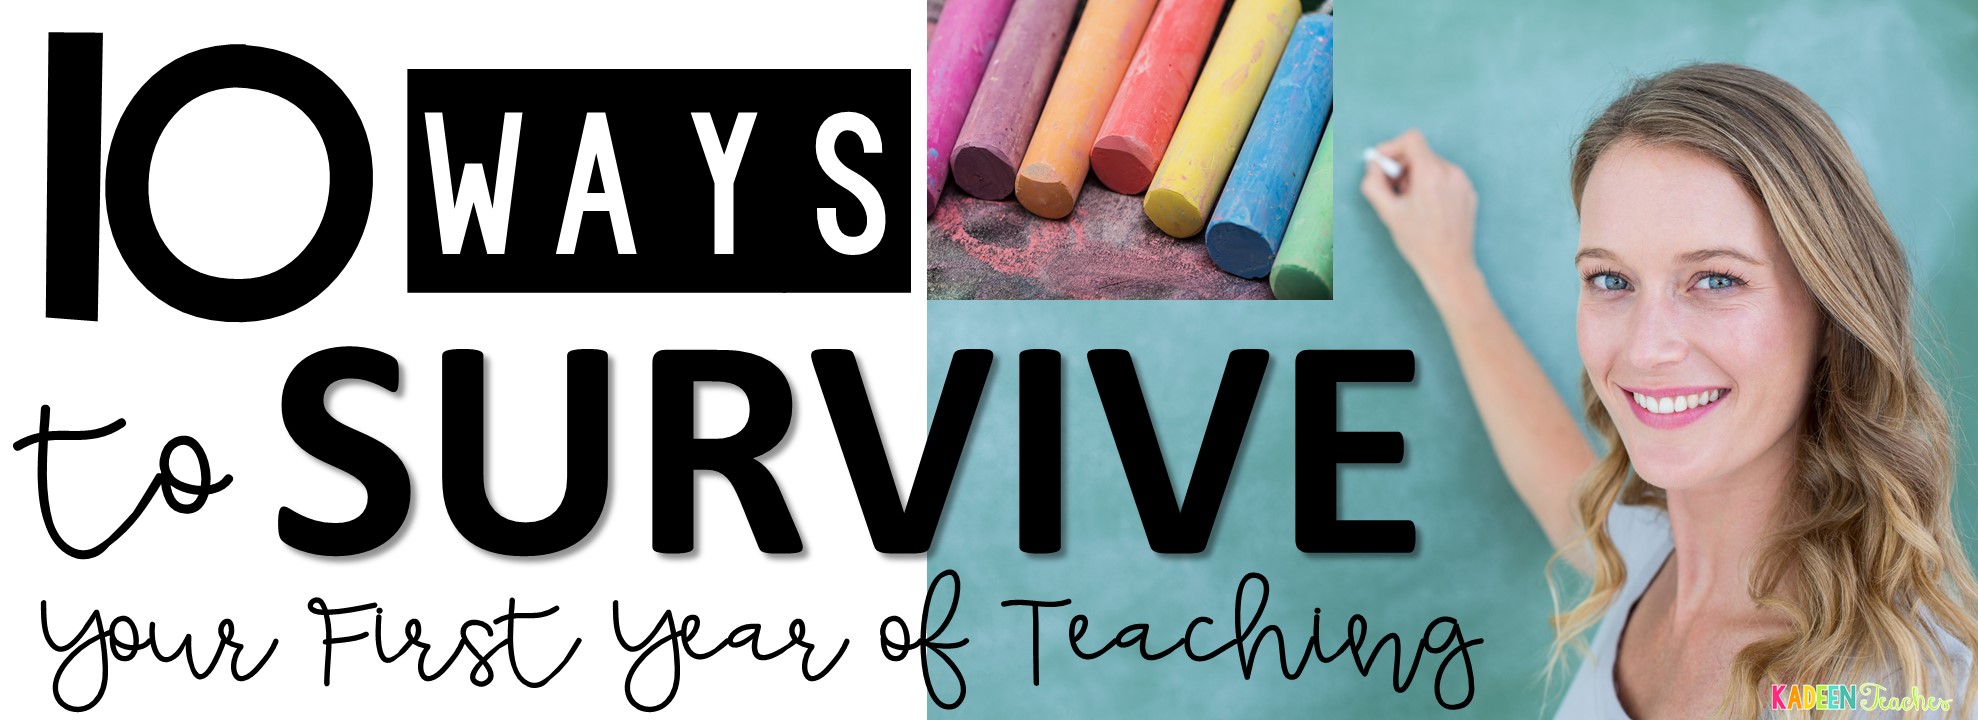 10 Ways to Survive Your First Year of Teaching